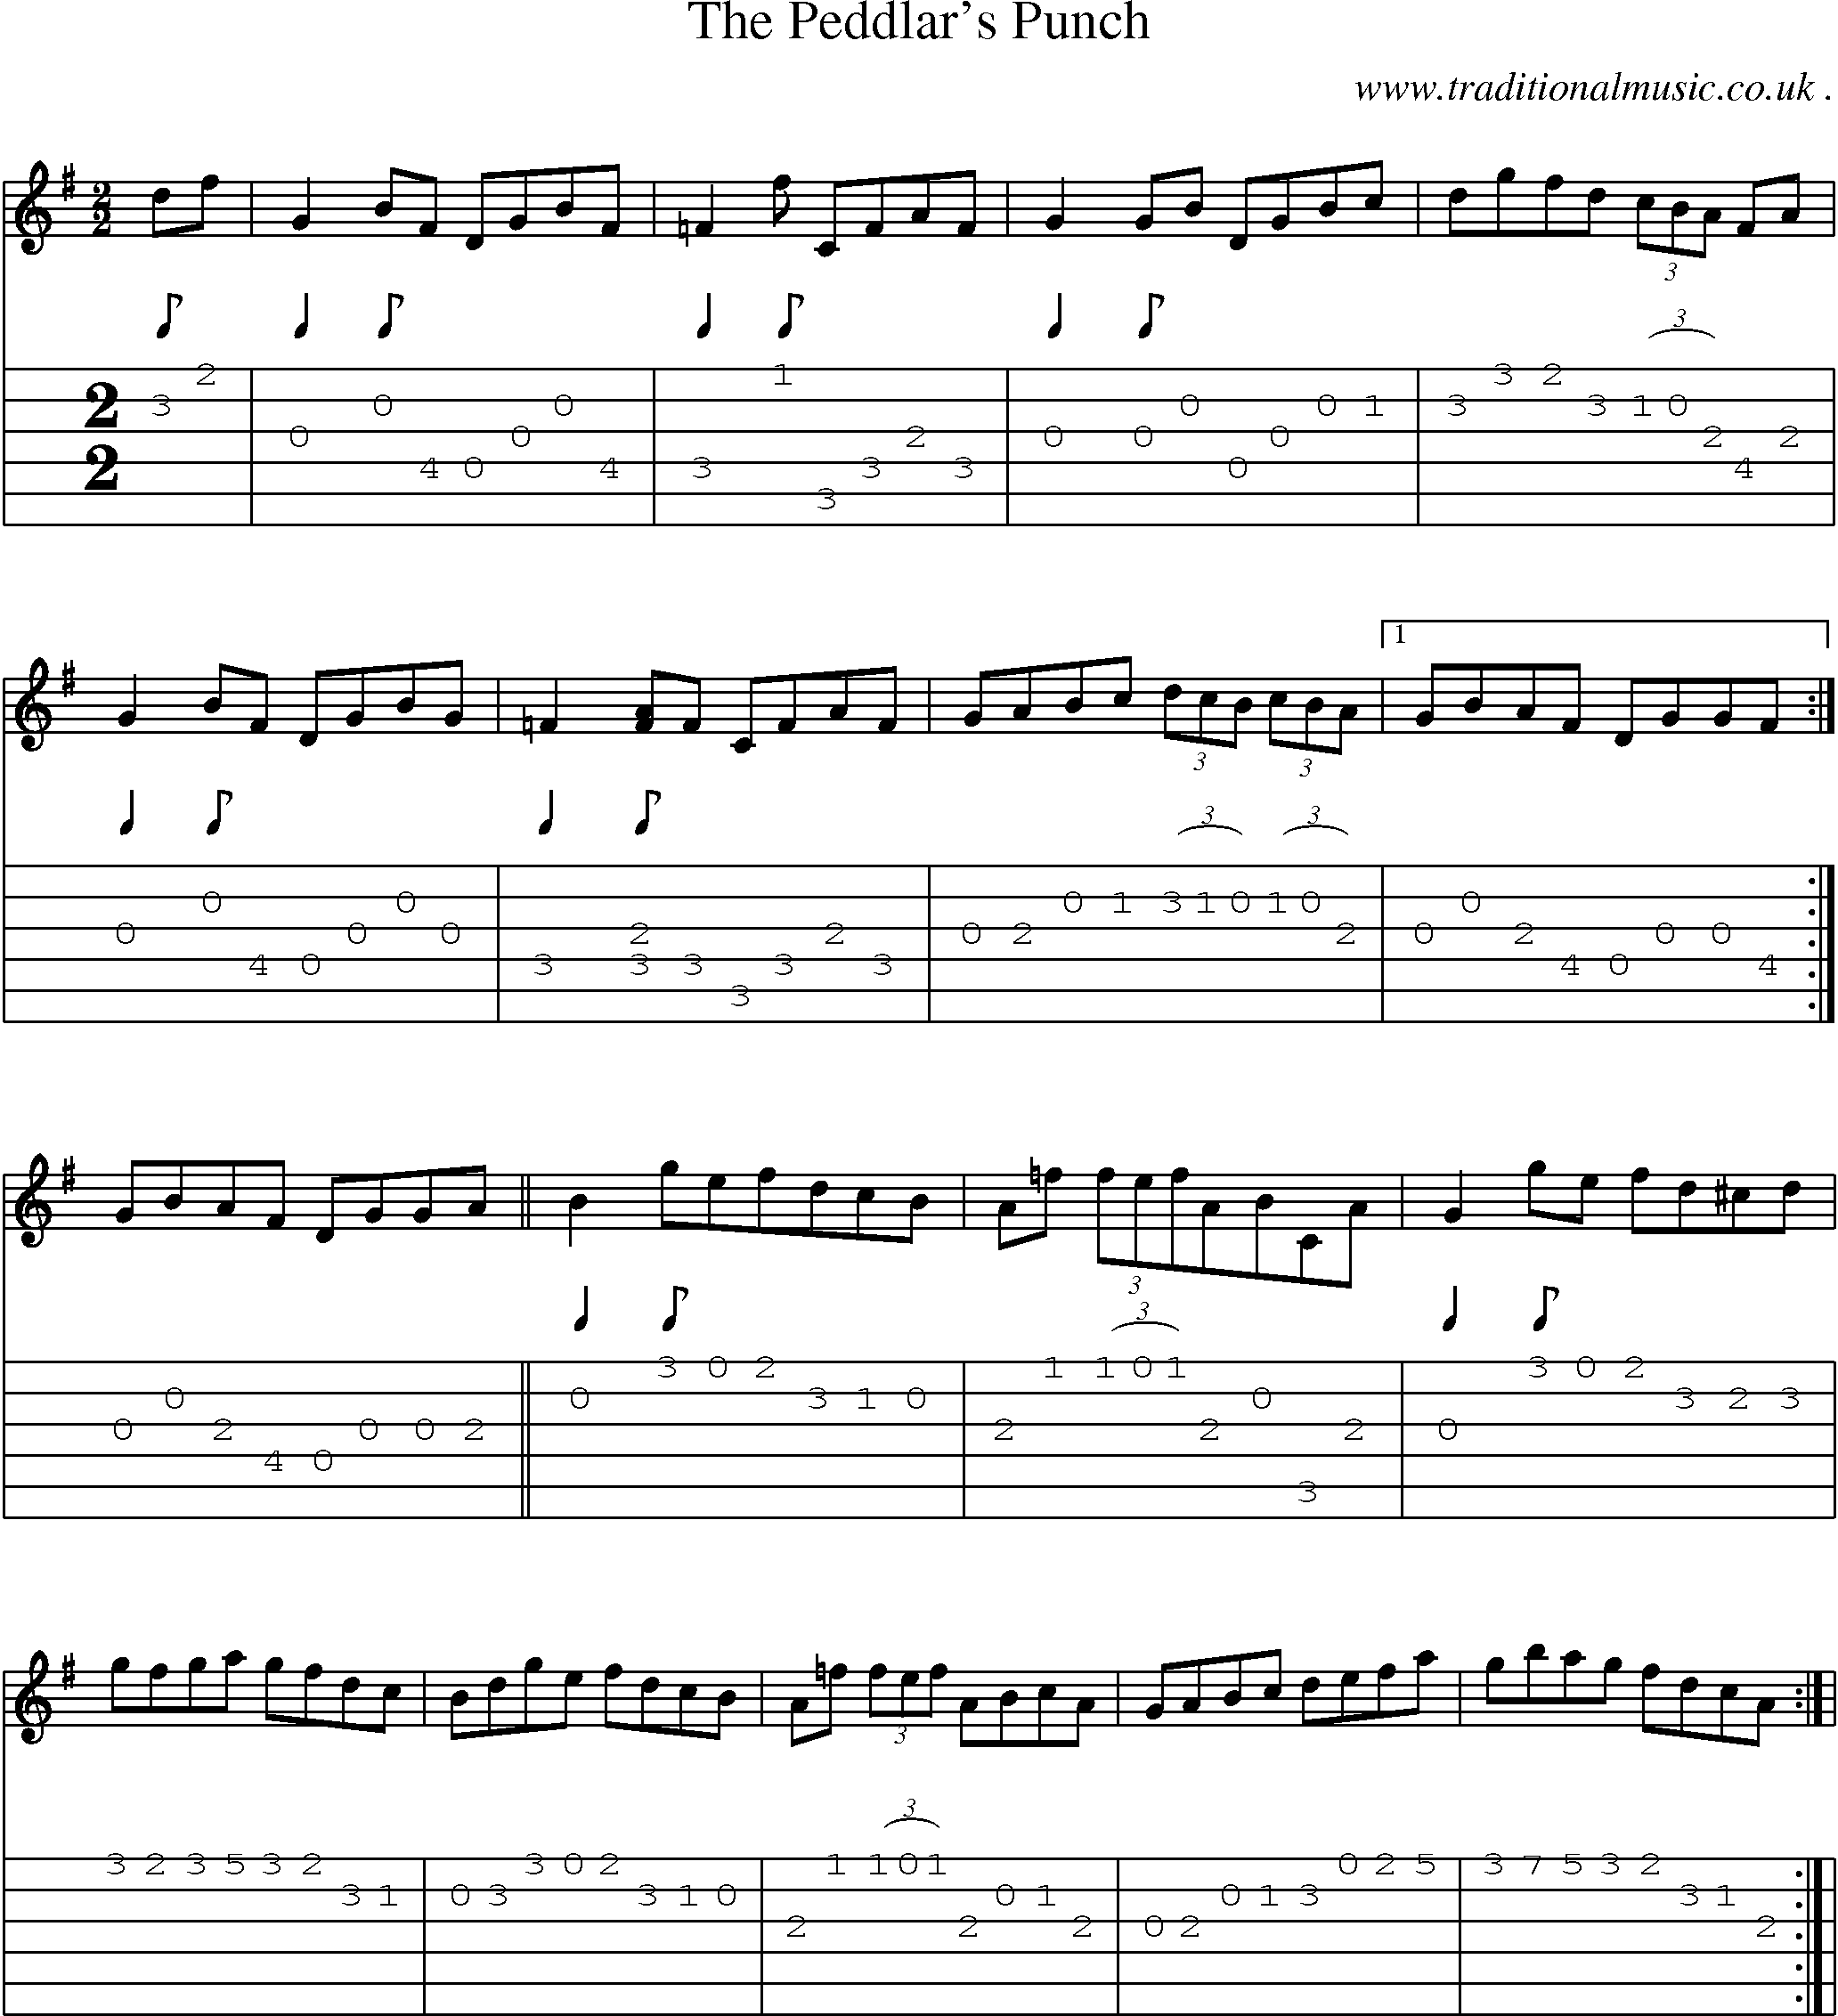 Sheet-Music and Guitar Tabs for The Peddlars Punch